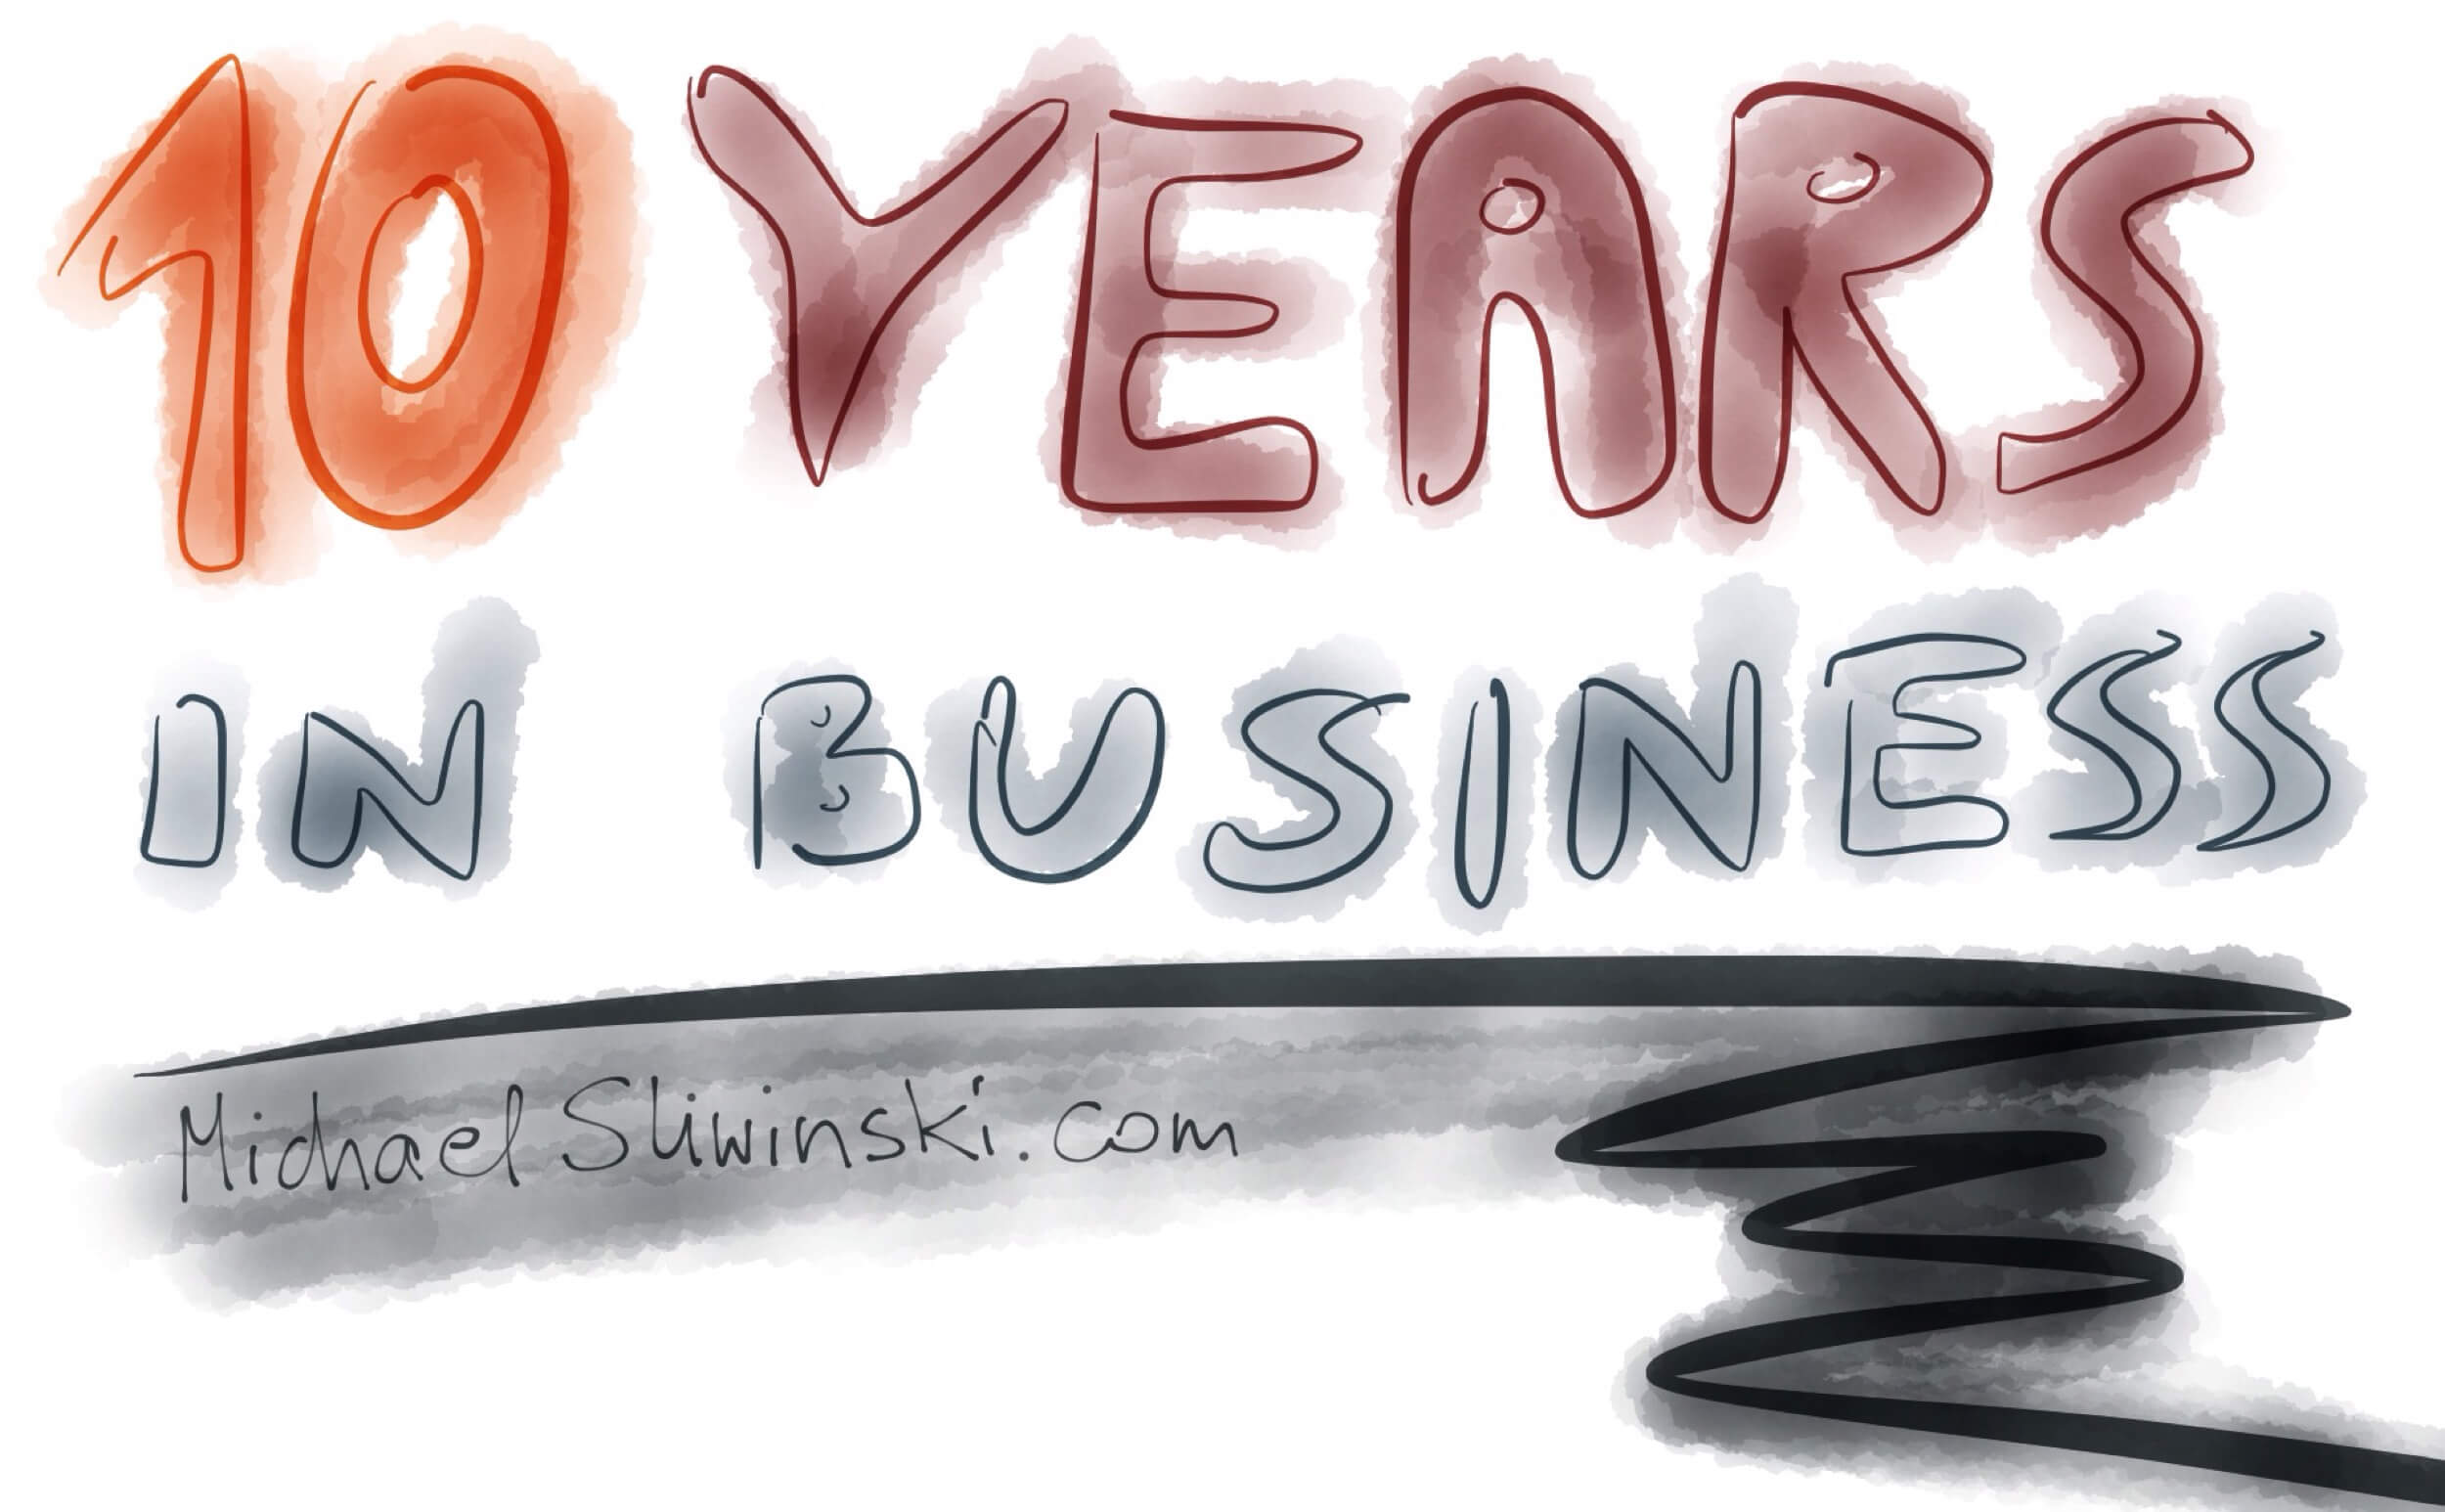 I’m officially a decade-long entrepreneur and loving it!